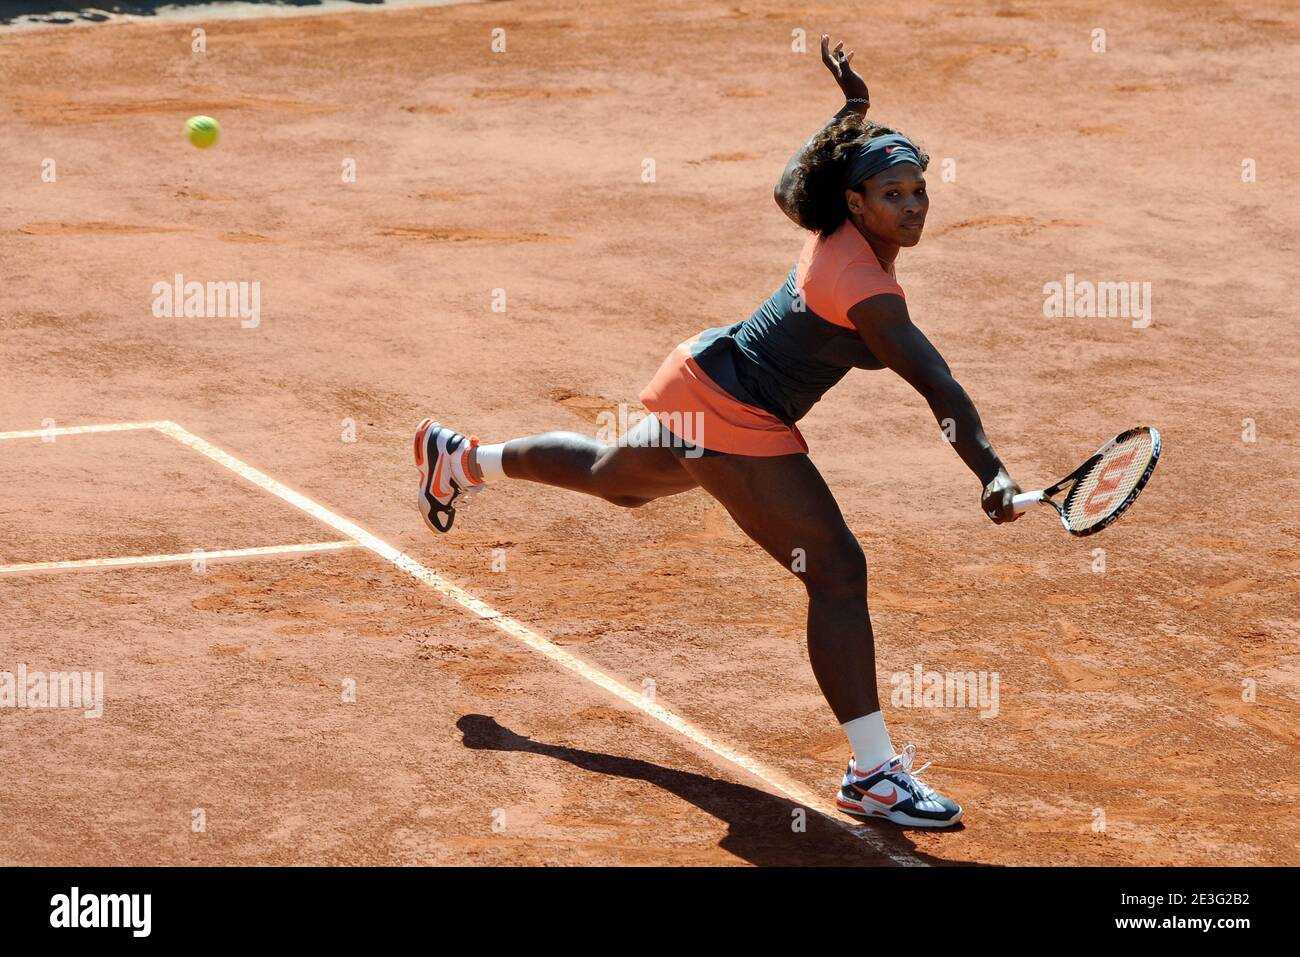 USA's Serena Williams defeats, 6-1, 6-2, Canada's Aleksandra Wozniak in their Fourth round of the of the French Open tennis at the Roland Garros stadium in Paris, France on June 1, 2009. Photo by Henri Szwarc/ABACAPRESS.COM Stock Photo